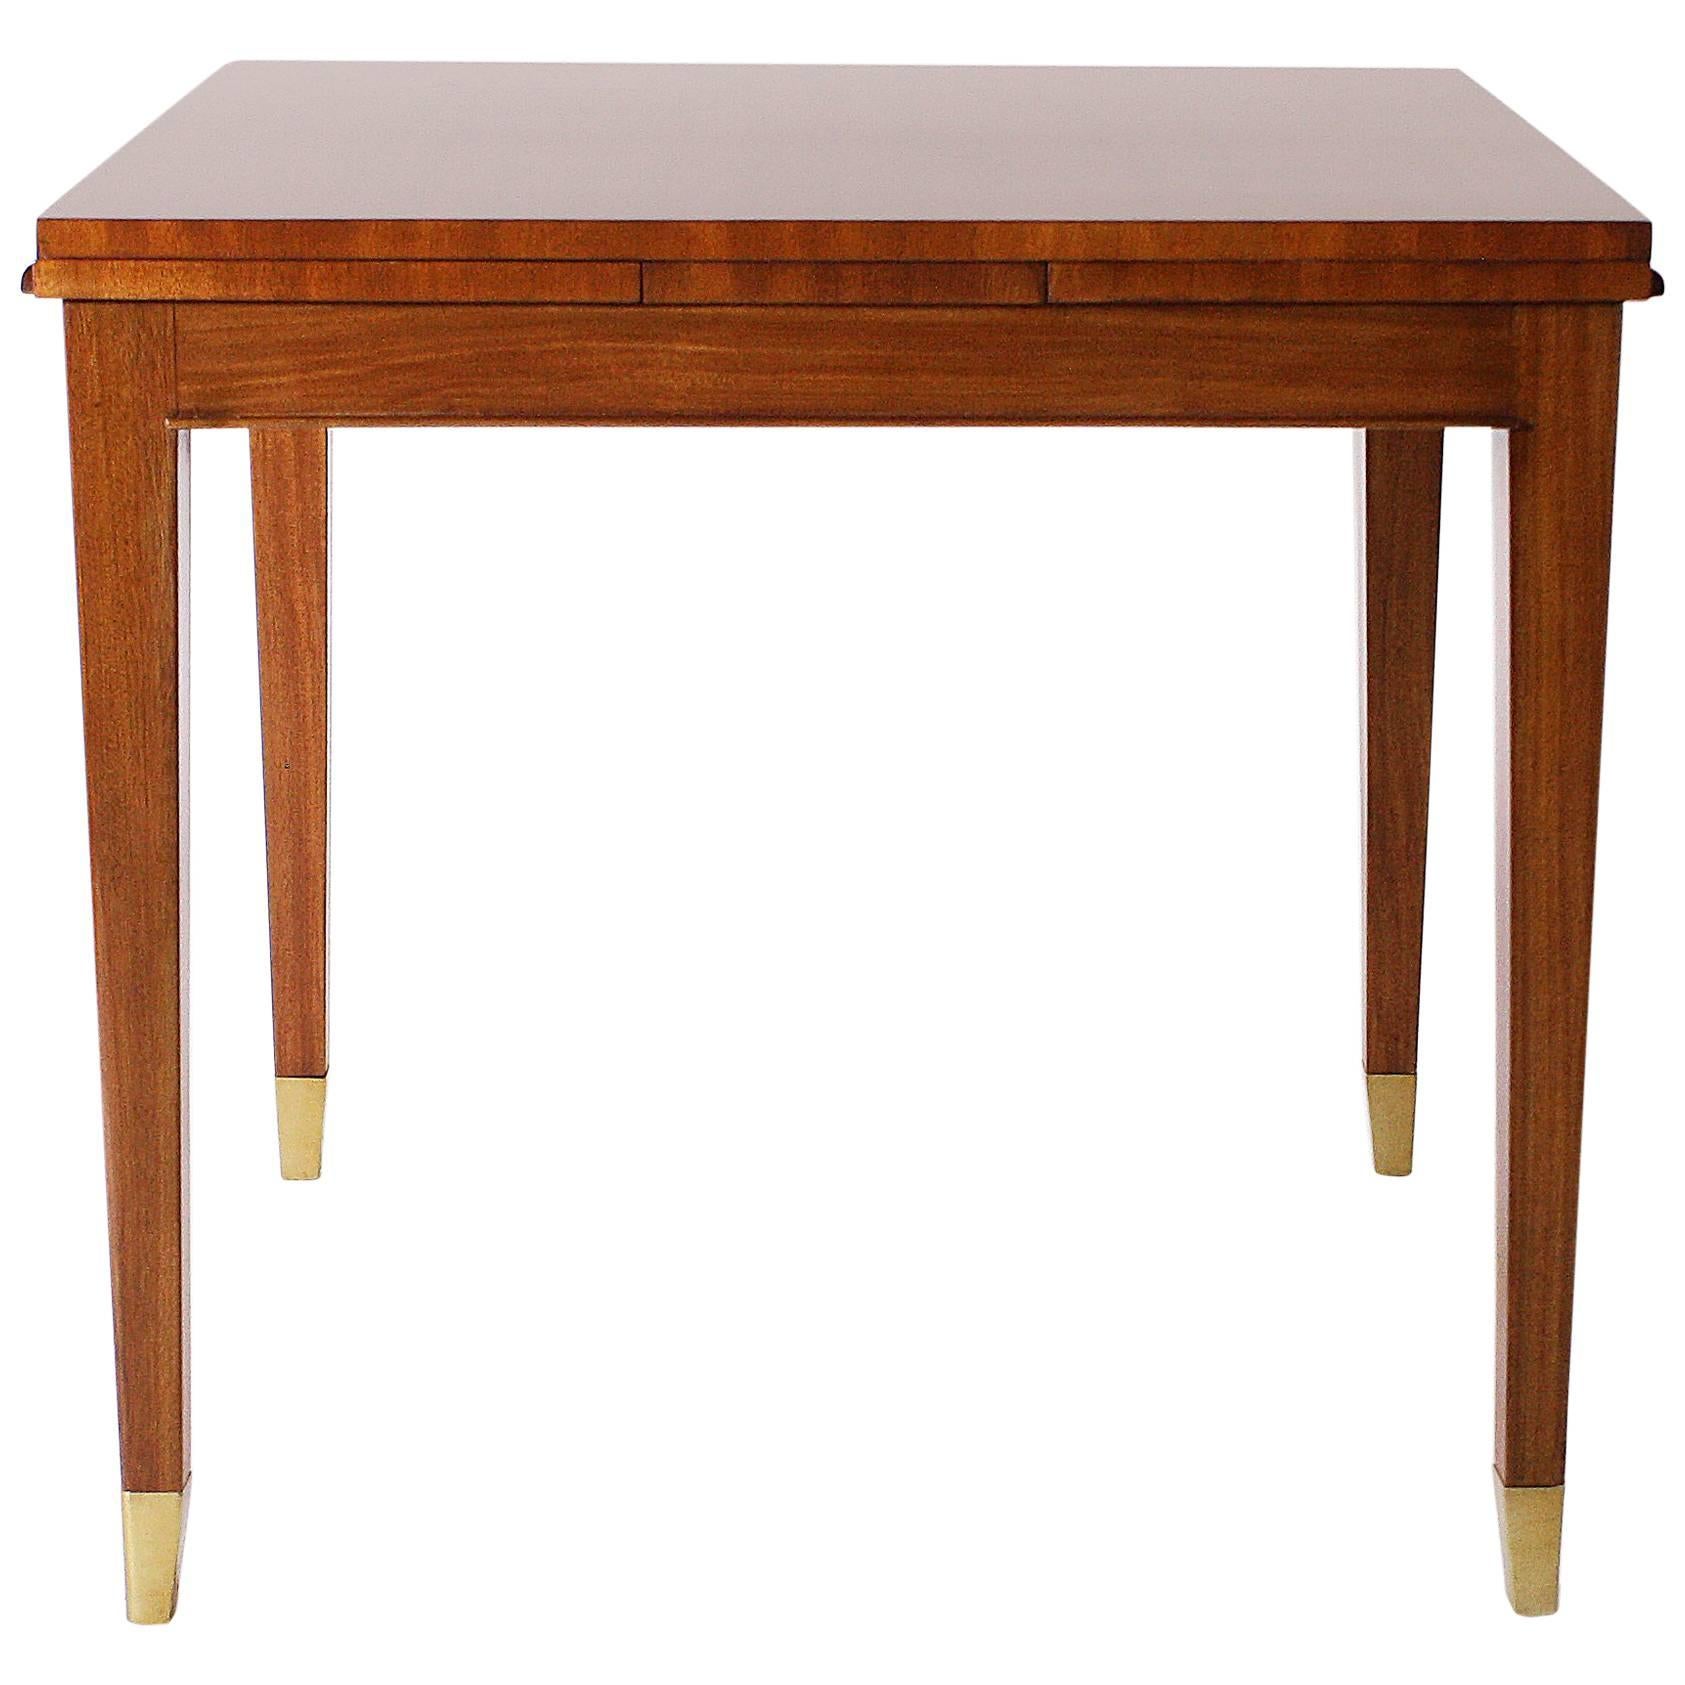 French Game Table in Merisier with Two Leaves, circa 1940